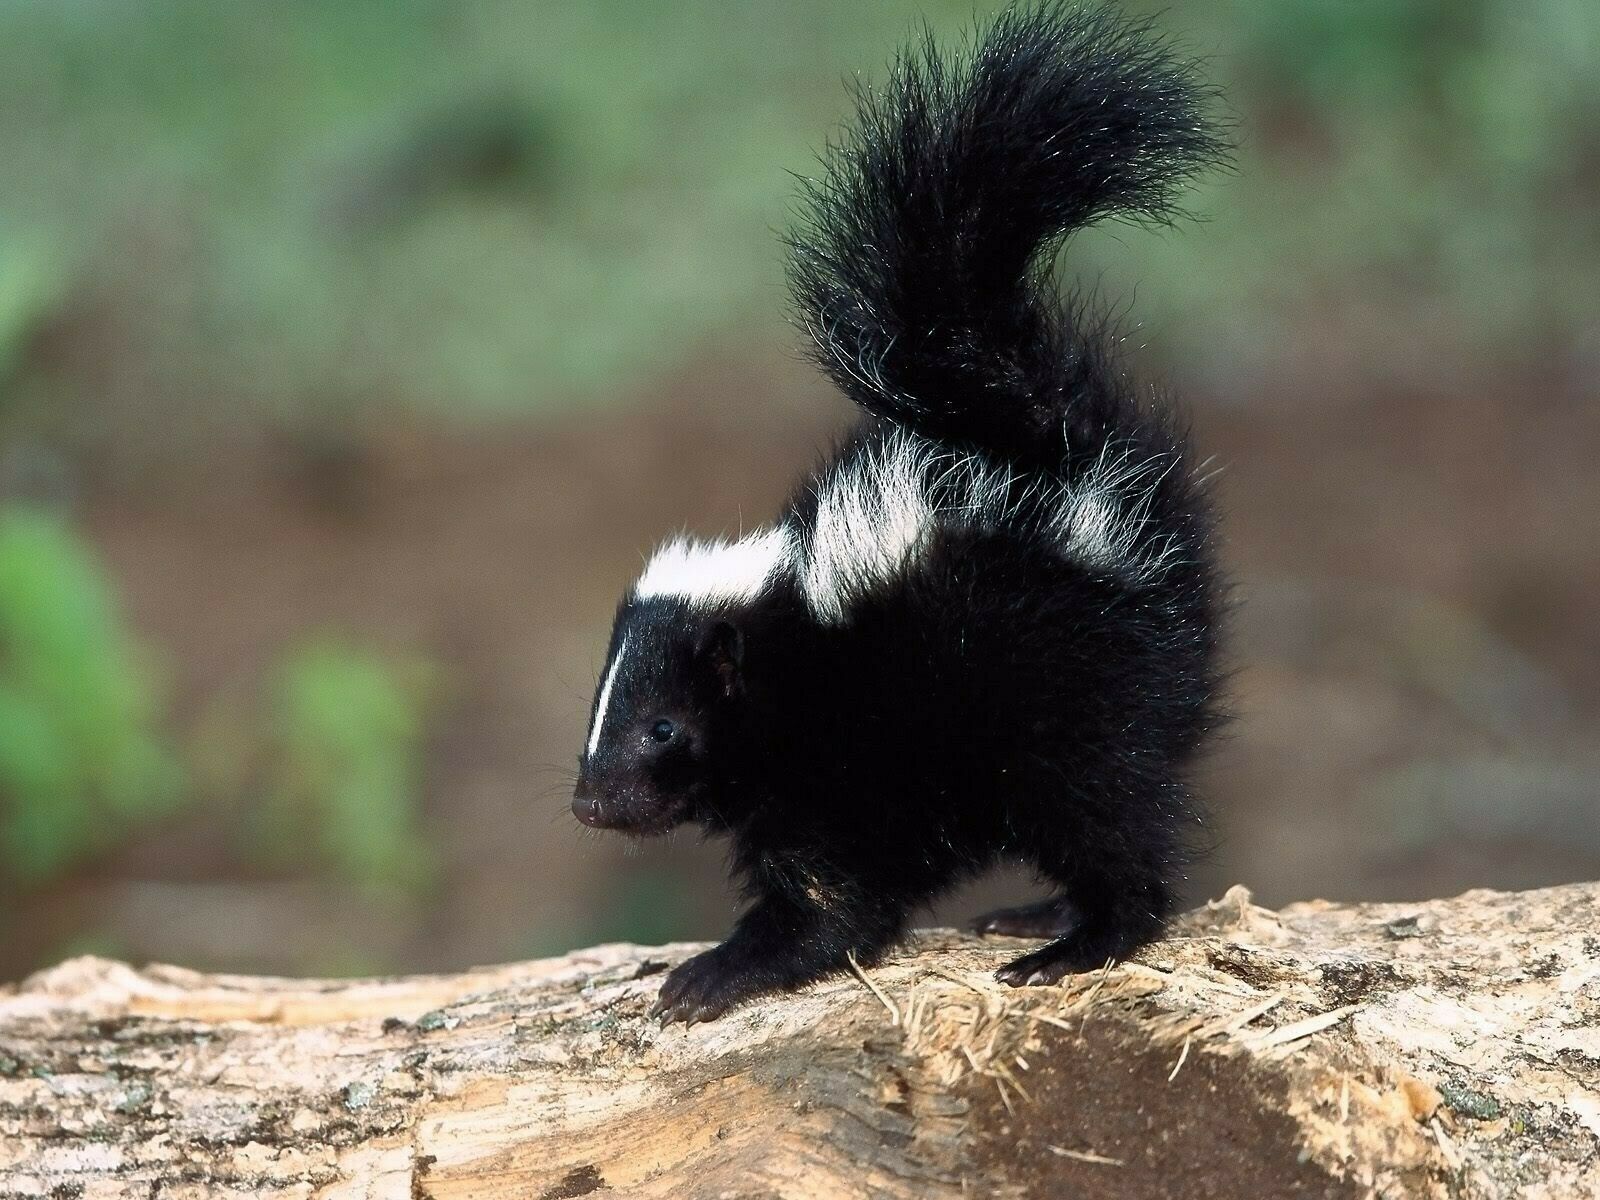 Skunk - Baby Skunk 8x10 Glossy Photo Picture Image #2